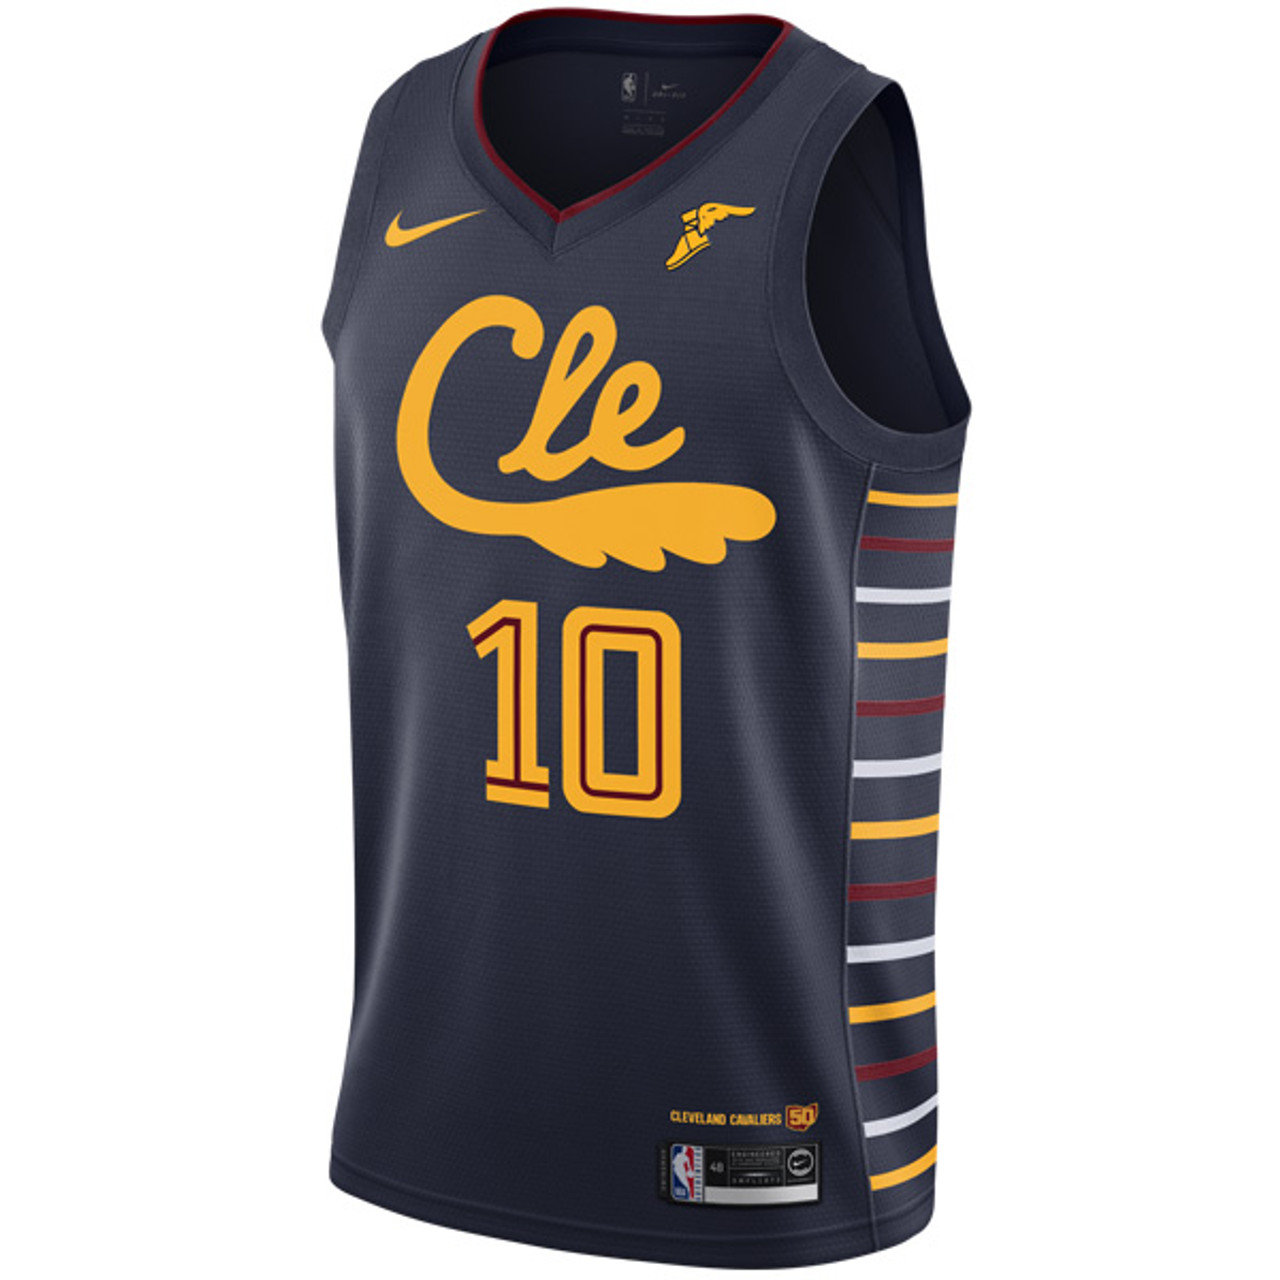 the city jersey